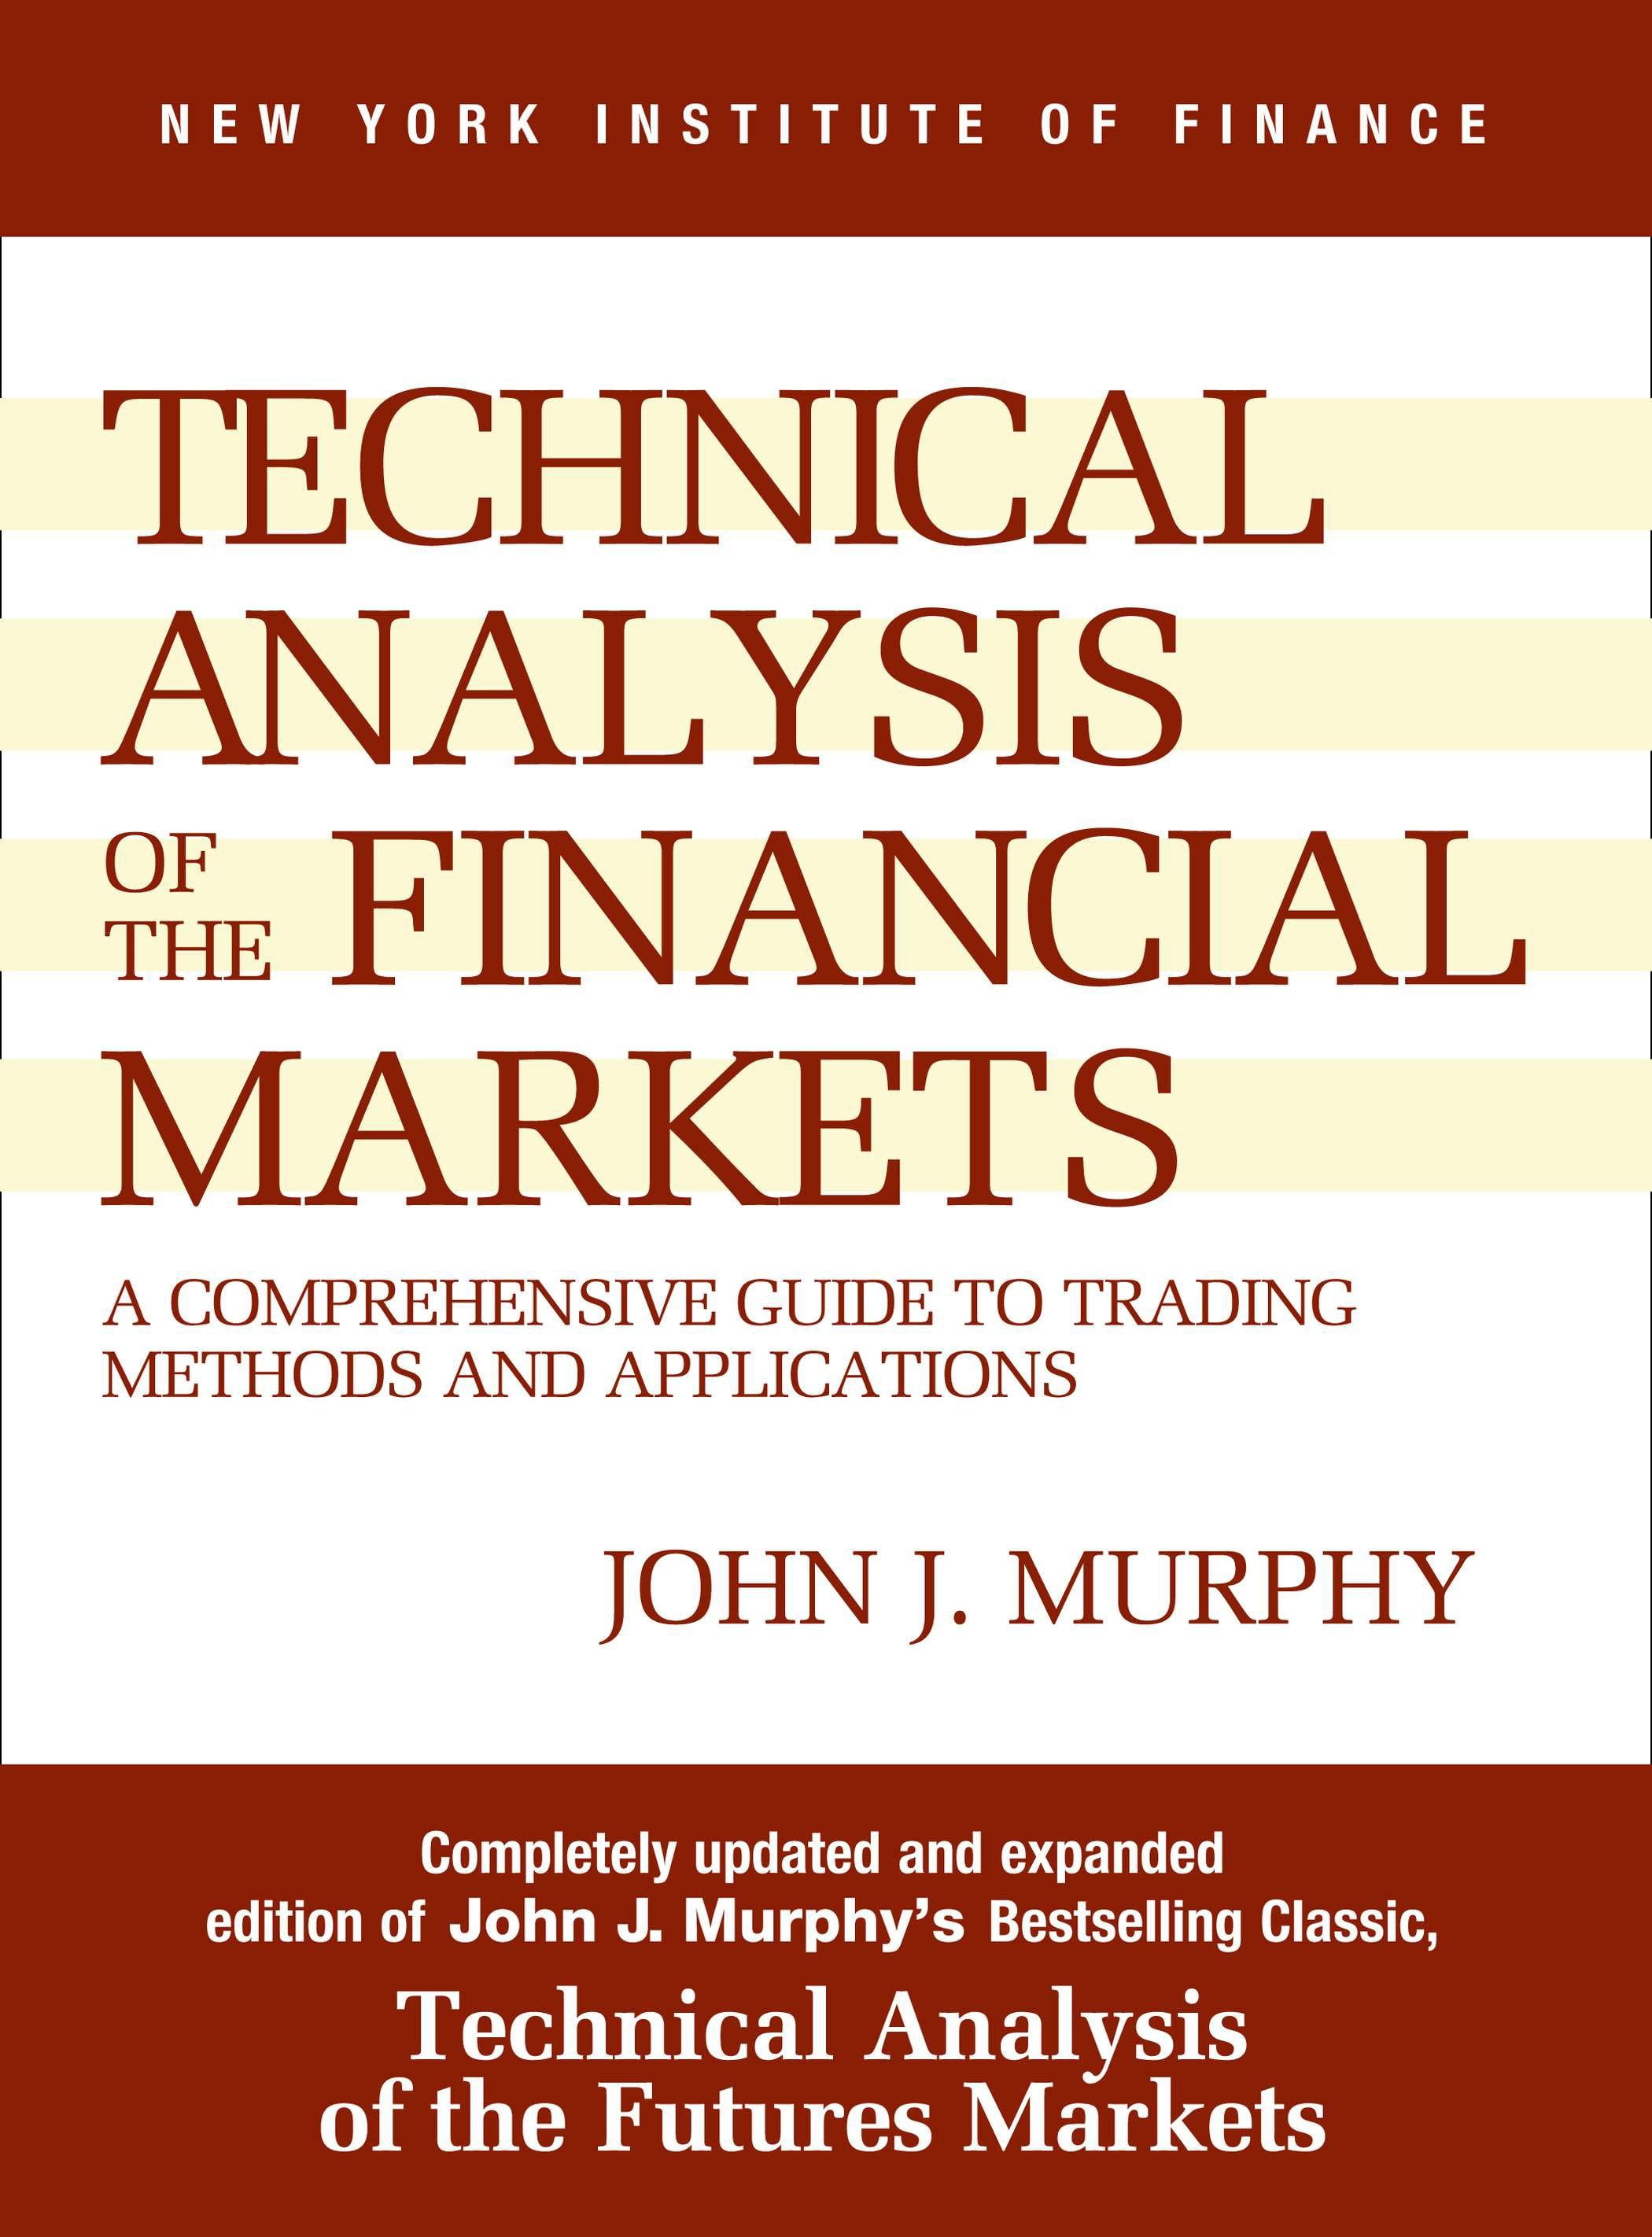 research on financial markets